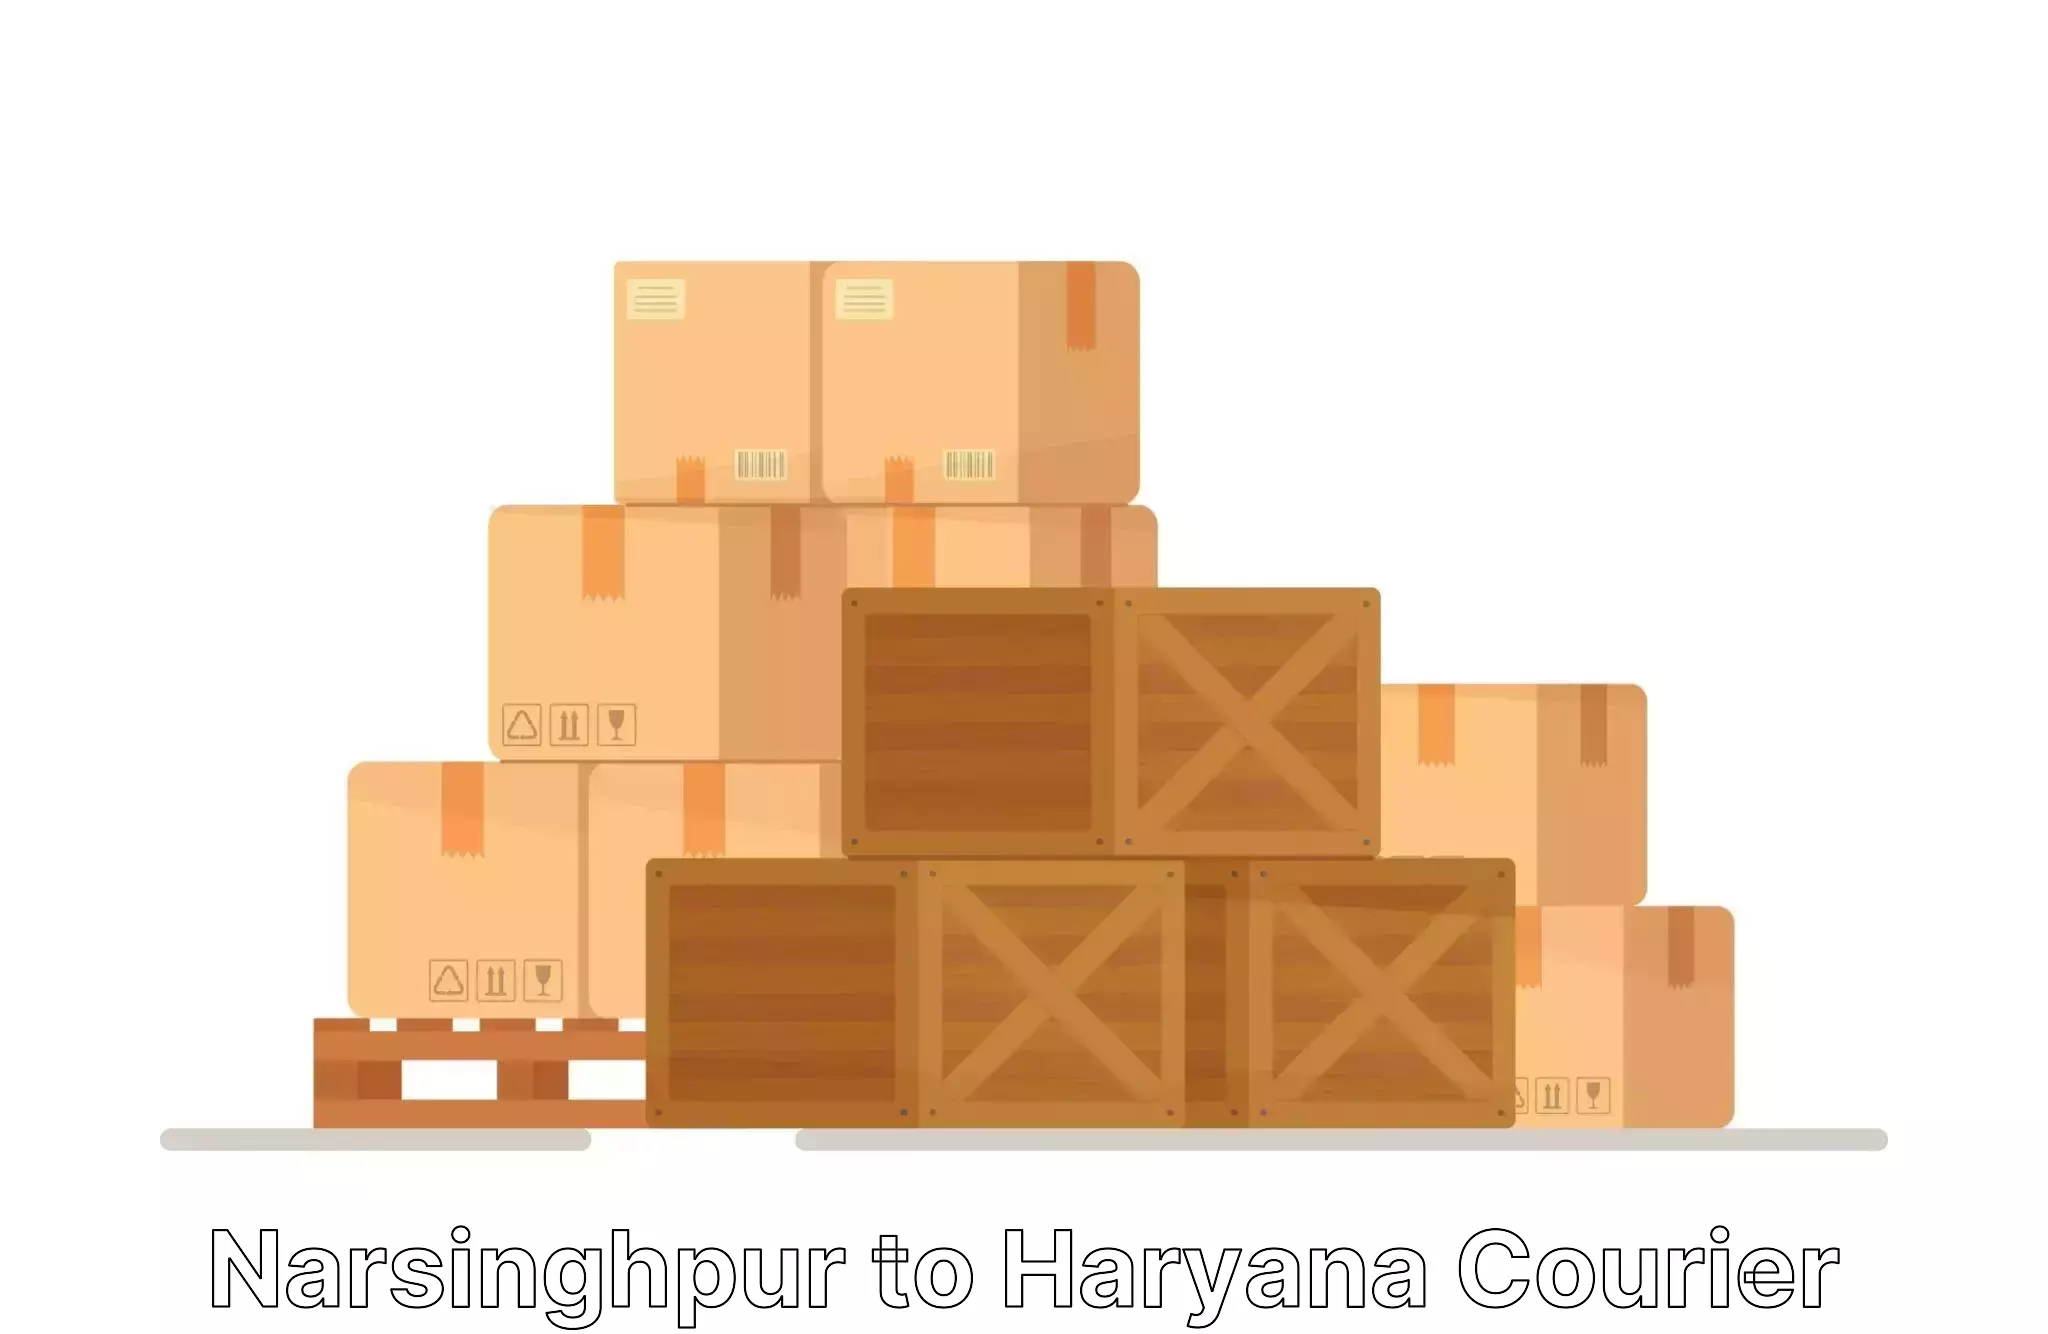 Efficient packing and moving Narsinghpur to NCR Haryana